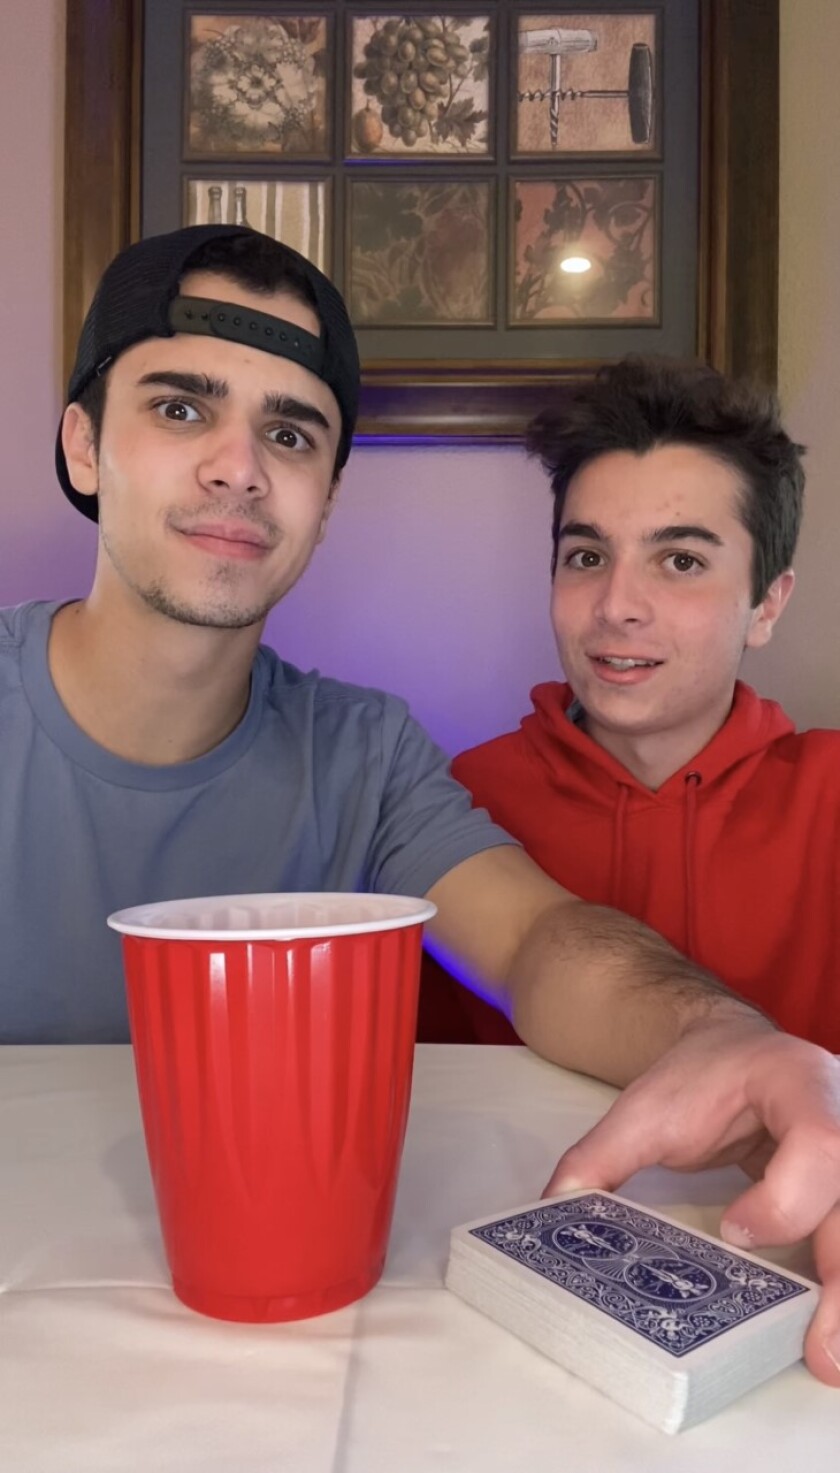 Pete Sciarrino with his brother, AJ, who appears in several of his TikTok videos.